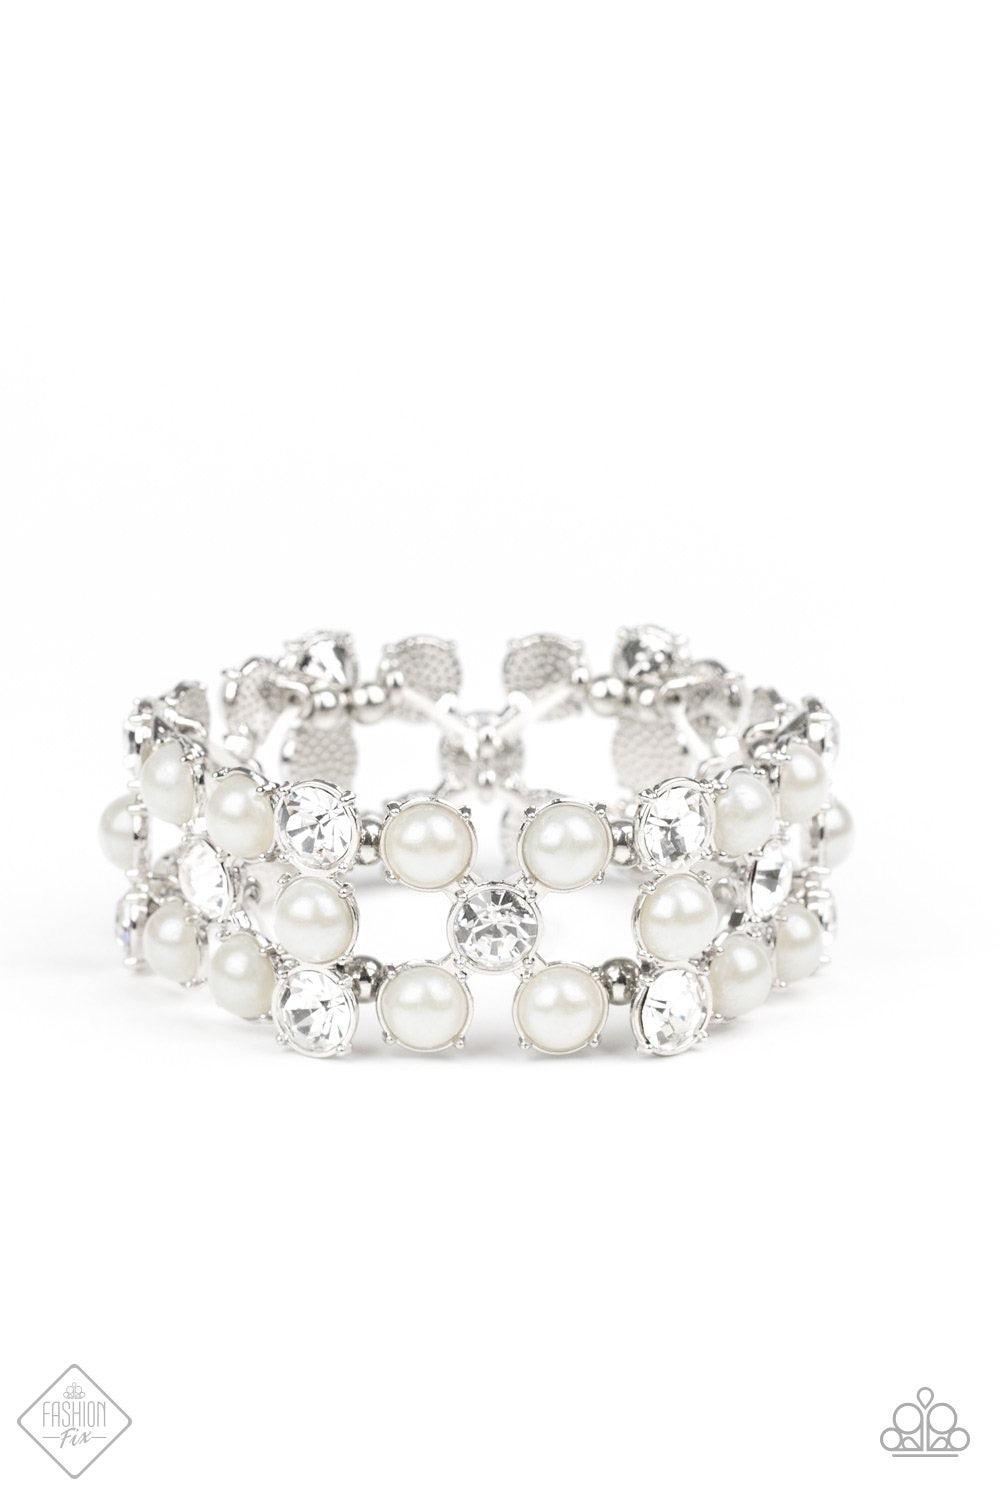 Paparazzi Accessories Diamonds and Debutantes - White Classic white pearls and brilliant white rhinestones are nestled into sleek silver frames and threaded along a stretchy band that wraps glamorously around the wrist. Jewelry